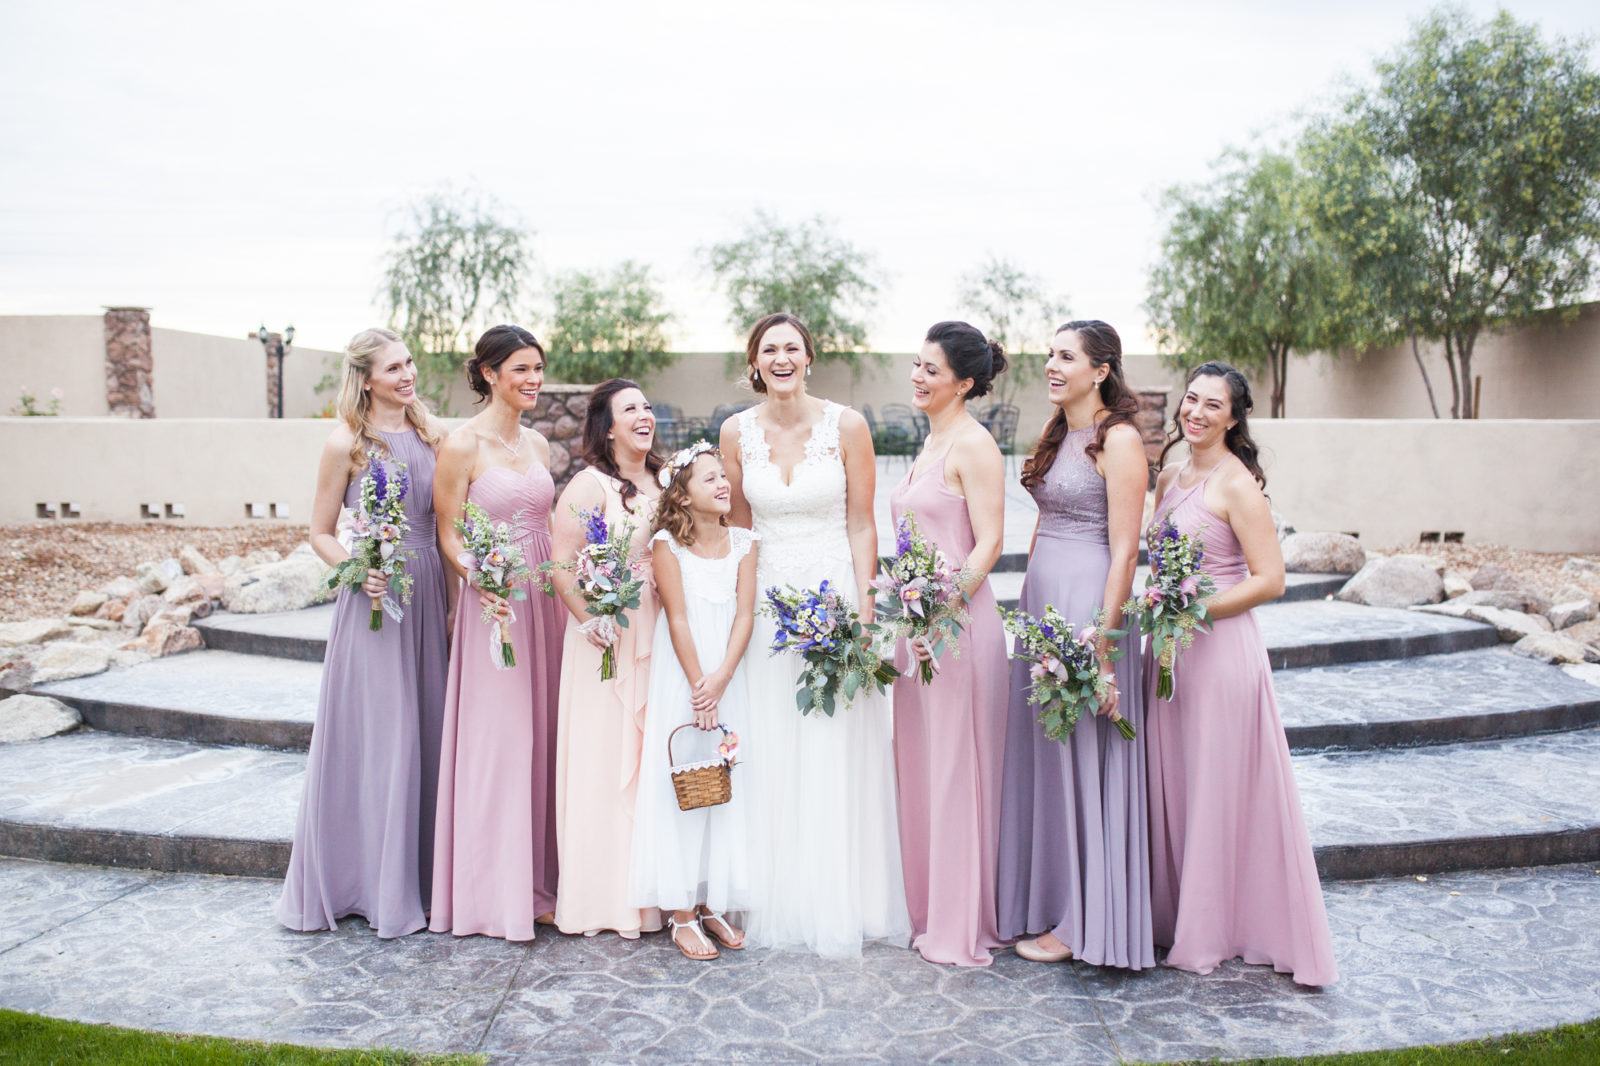 Bride with bridesmaids laughing in pink and purple dresses